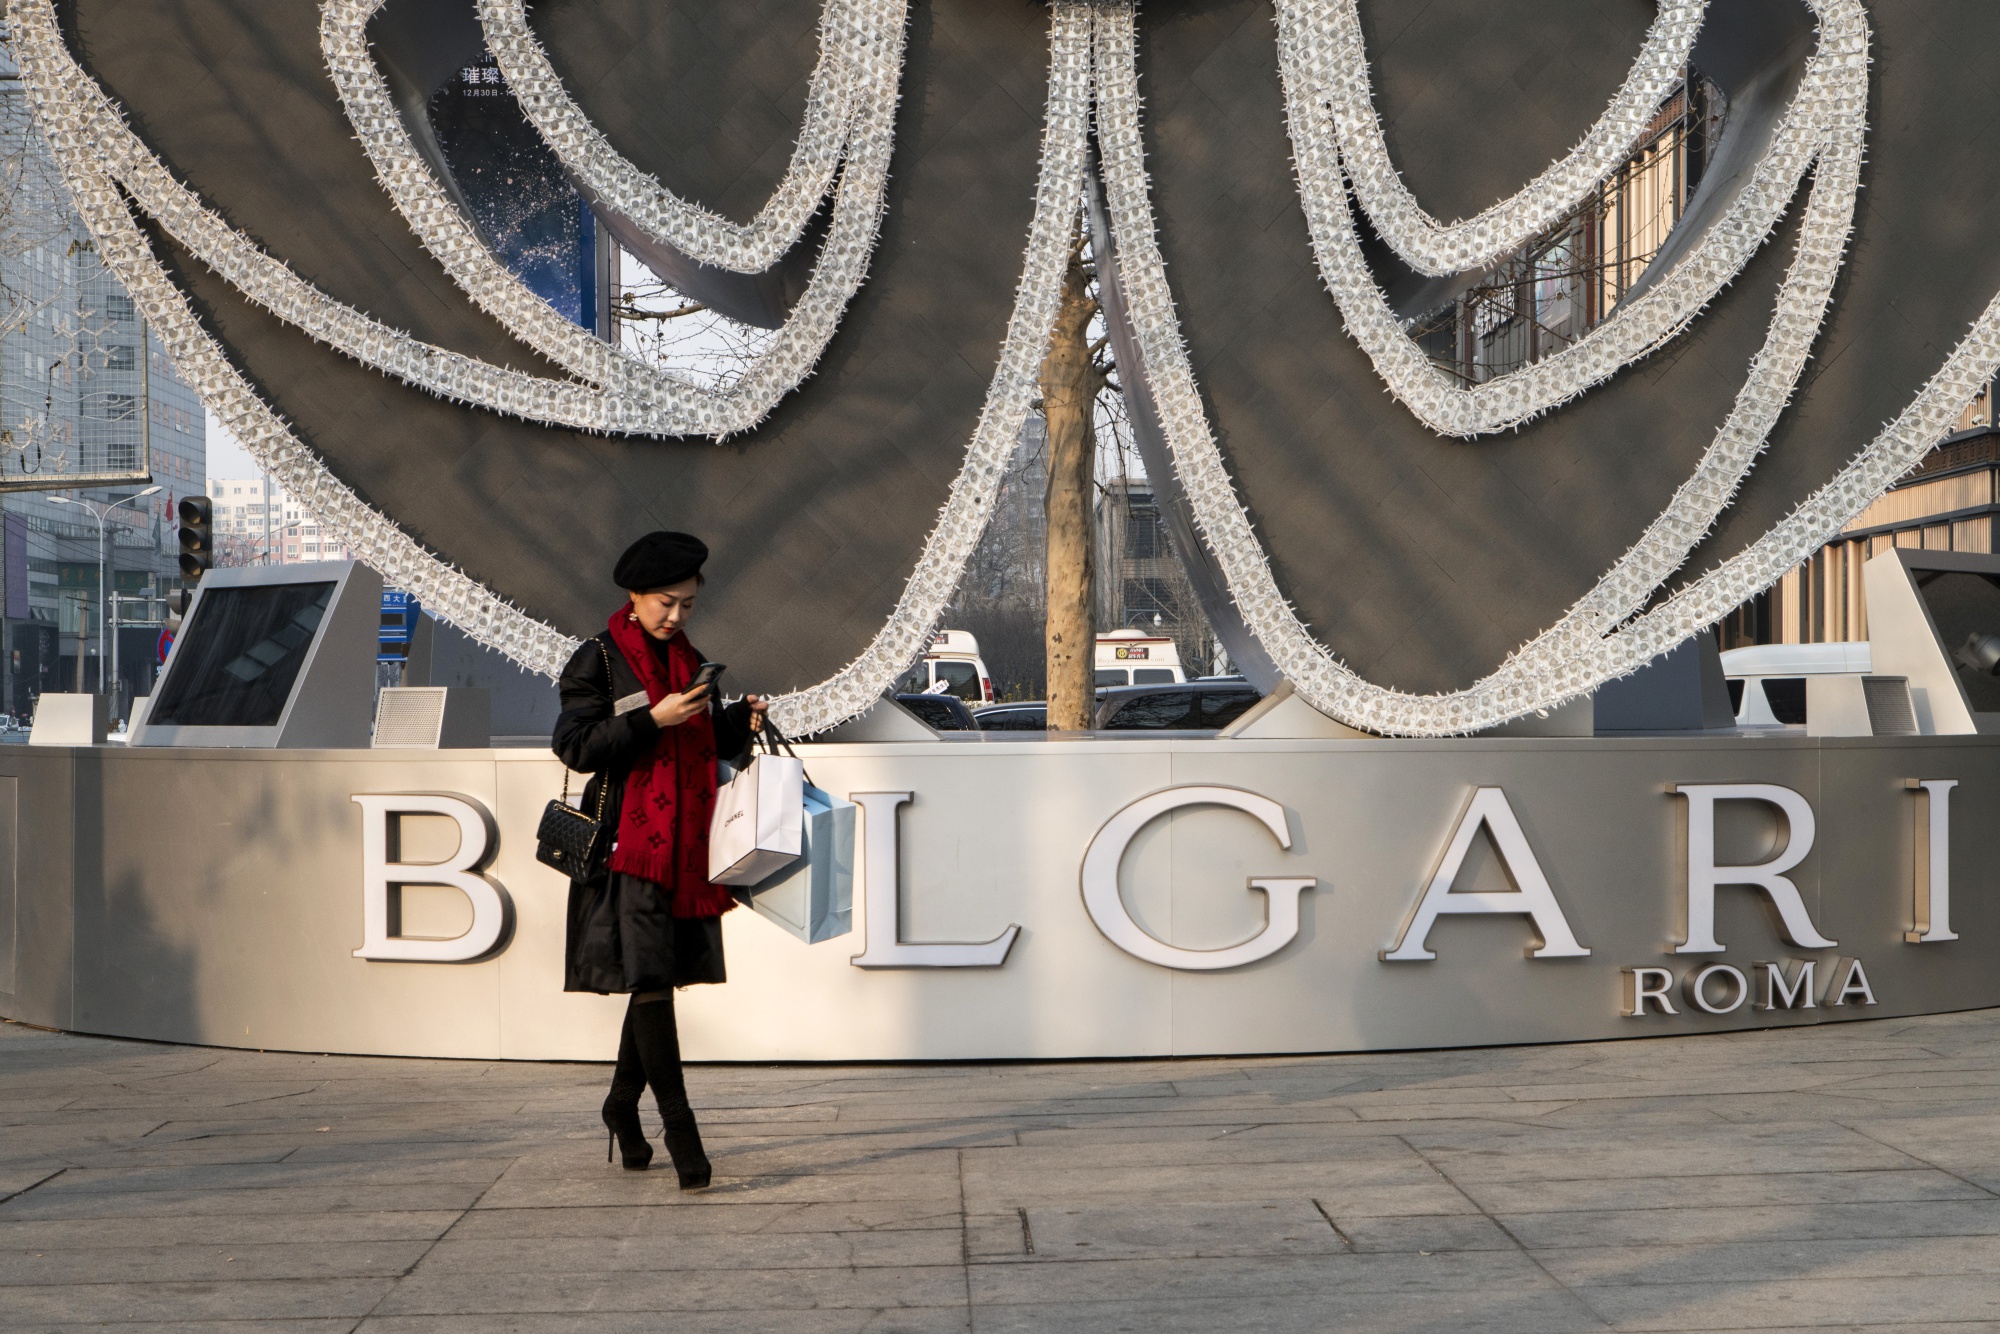 Rich Chinese Still Hungry for Luxury Goods Despite Slowdown - Bloomberg